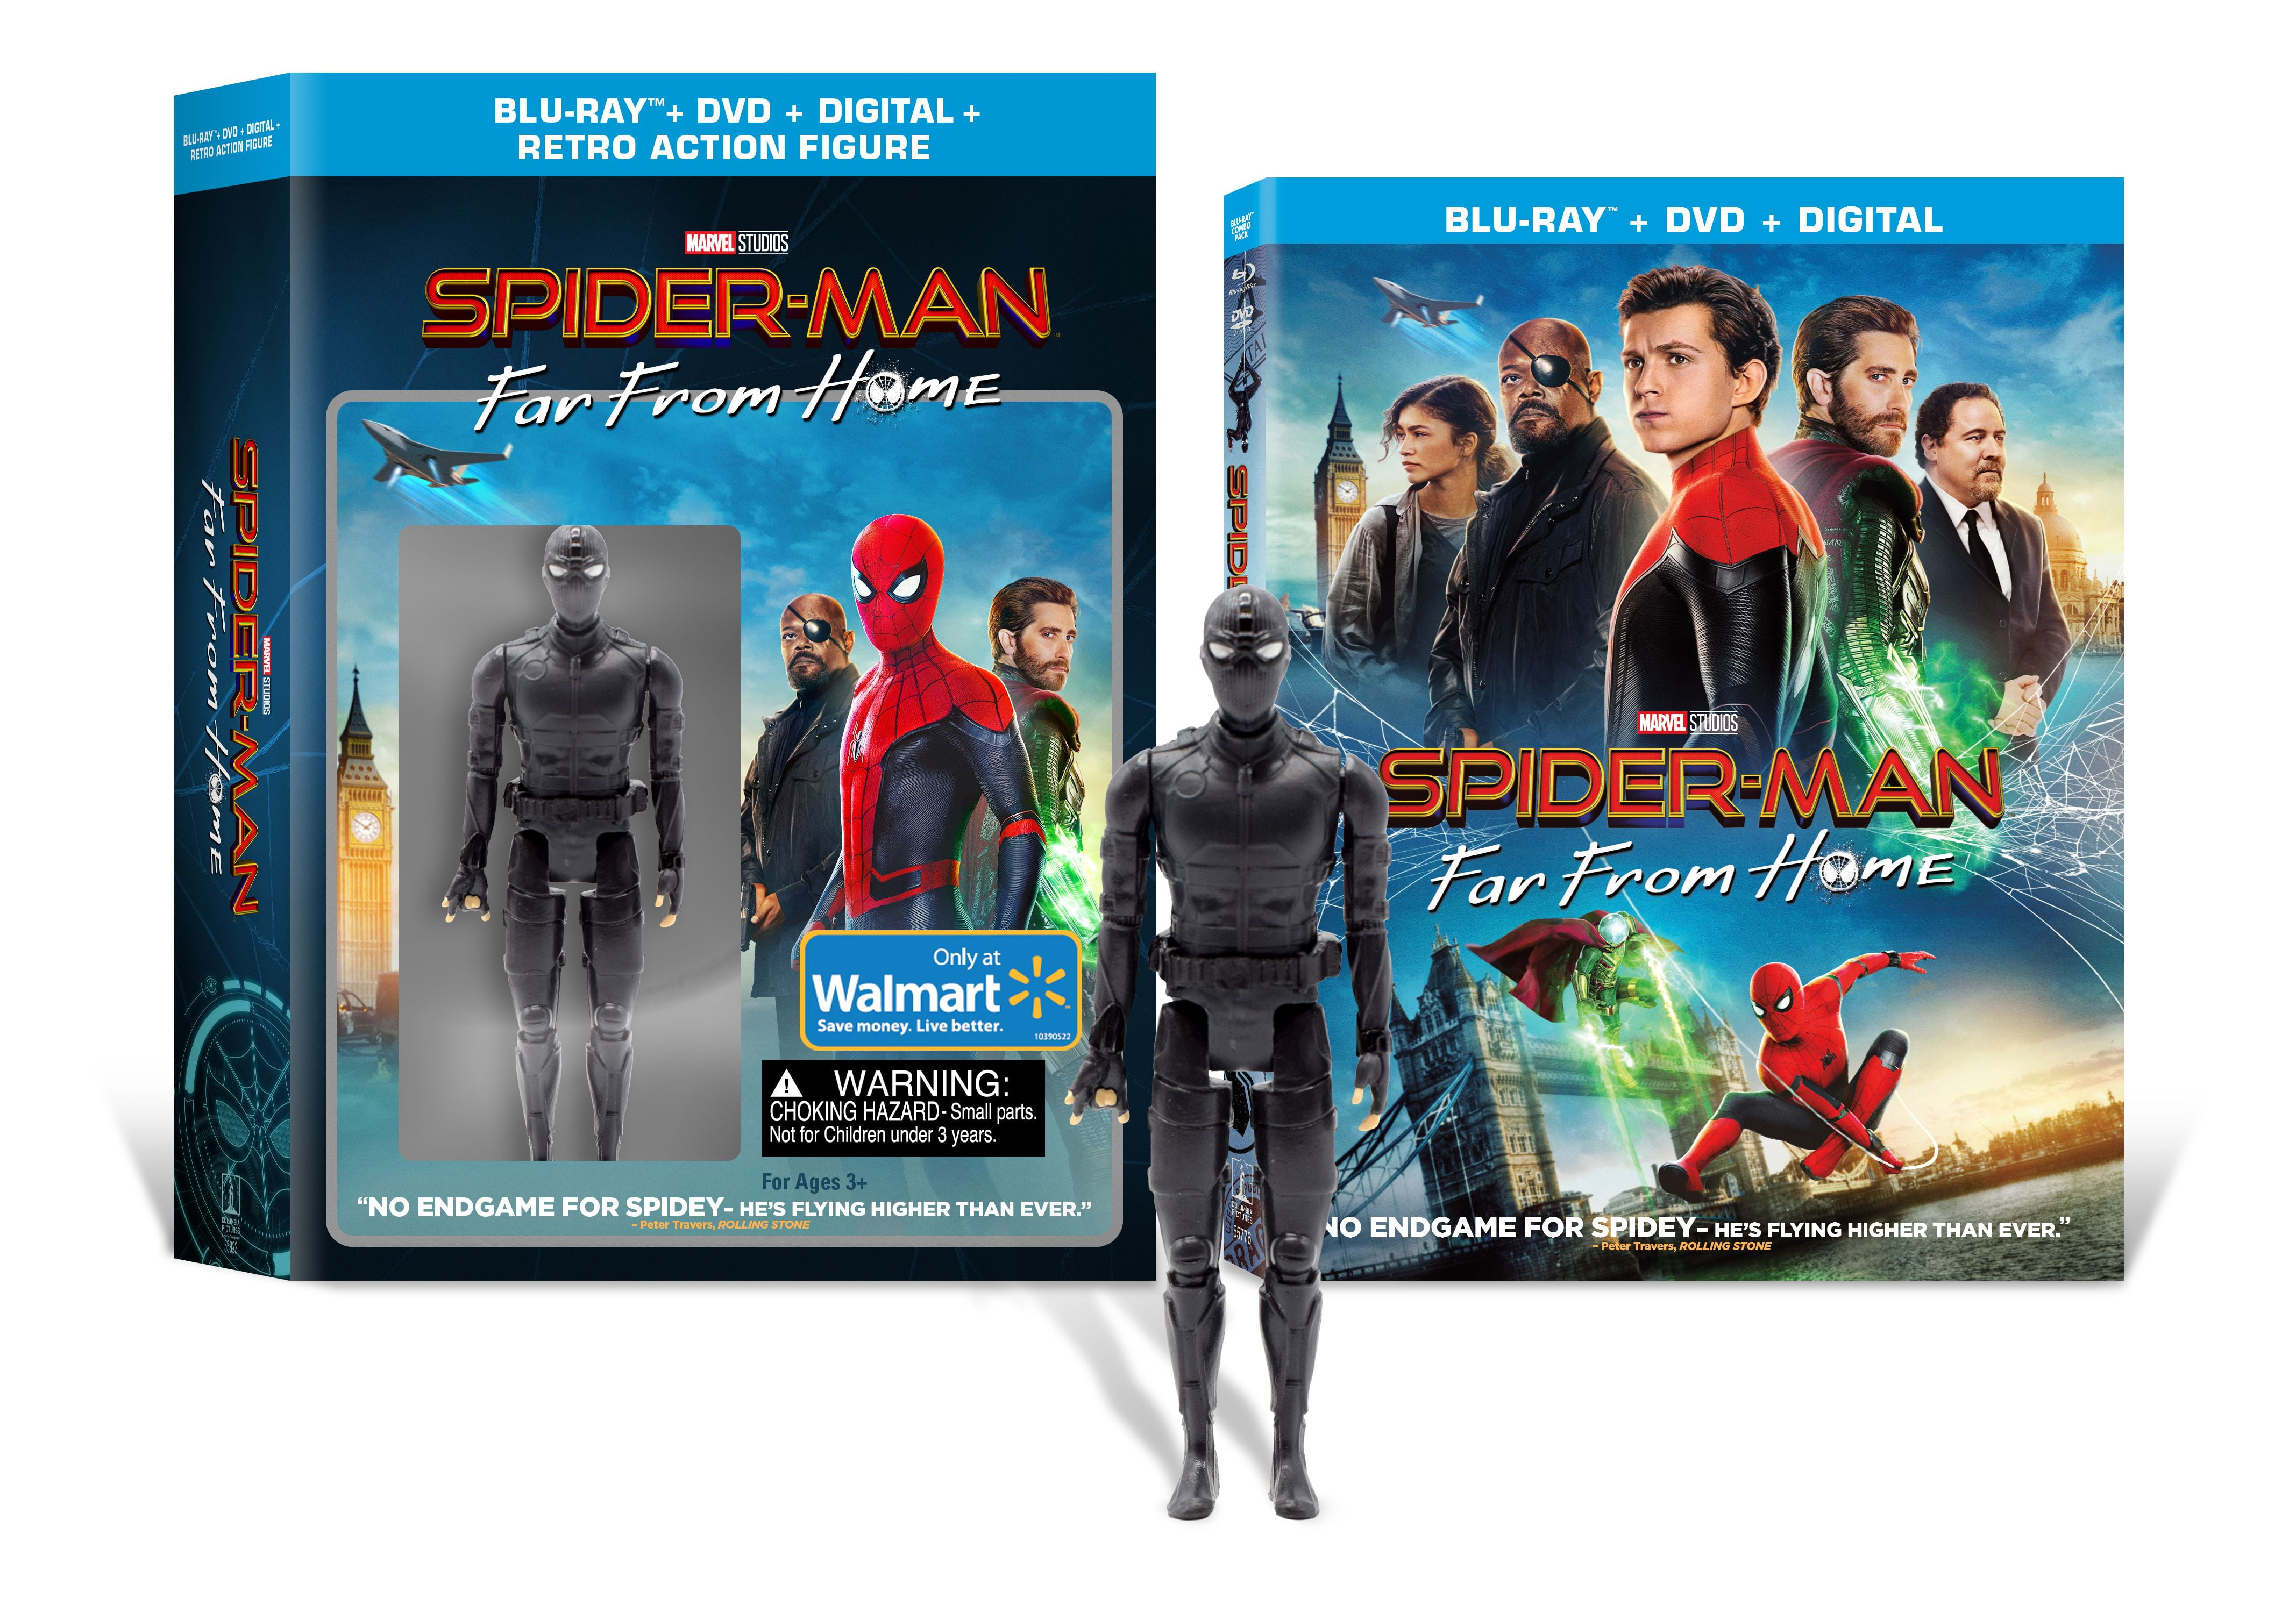 spider man far from home figurine